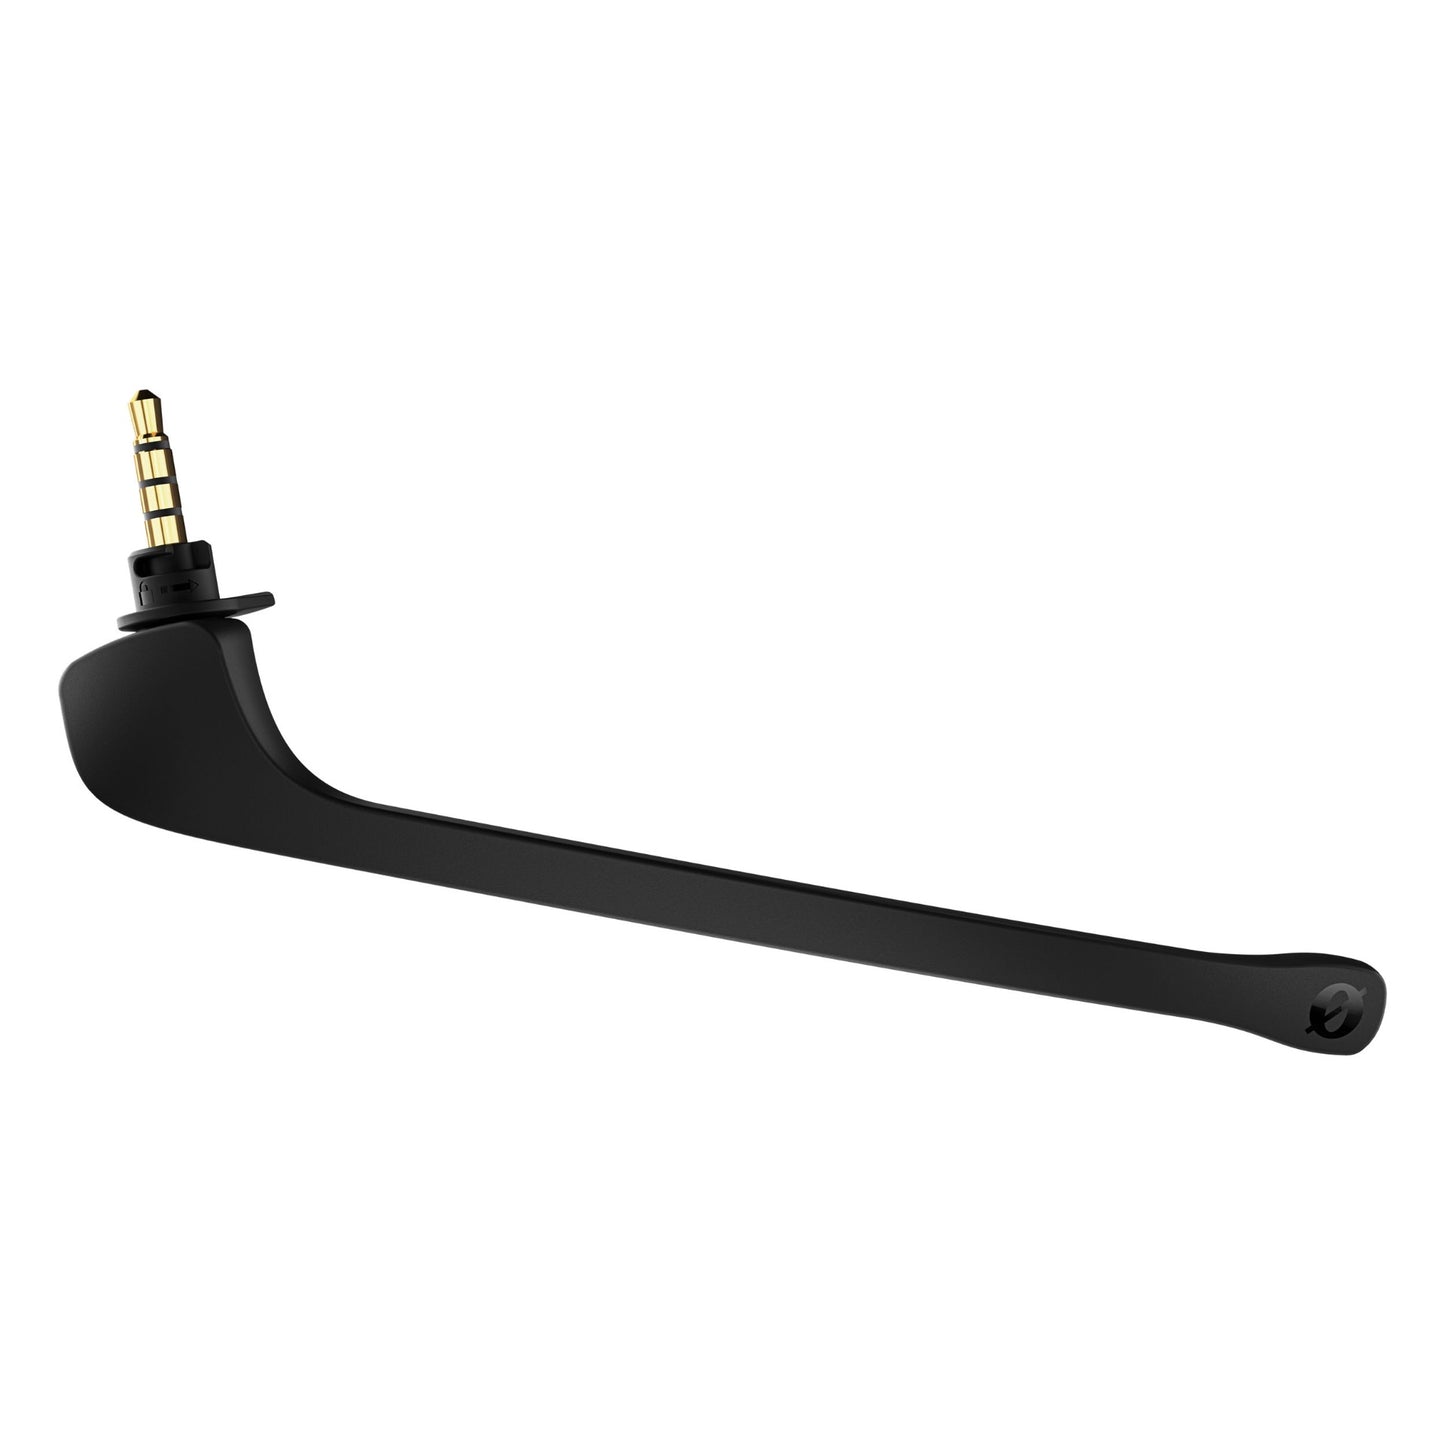 Rode NTH-Mic Detachable Headset Microphone for Rode NTH-100 Headsets